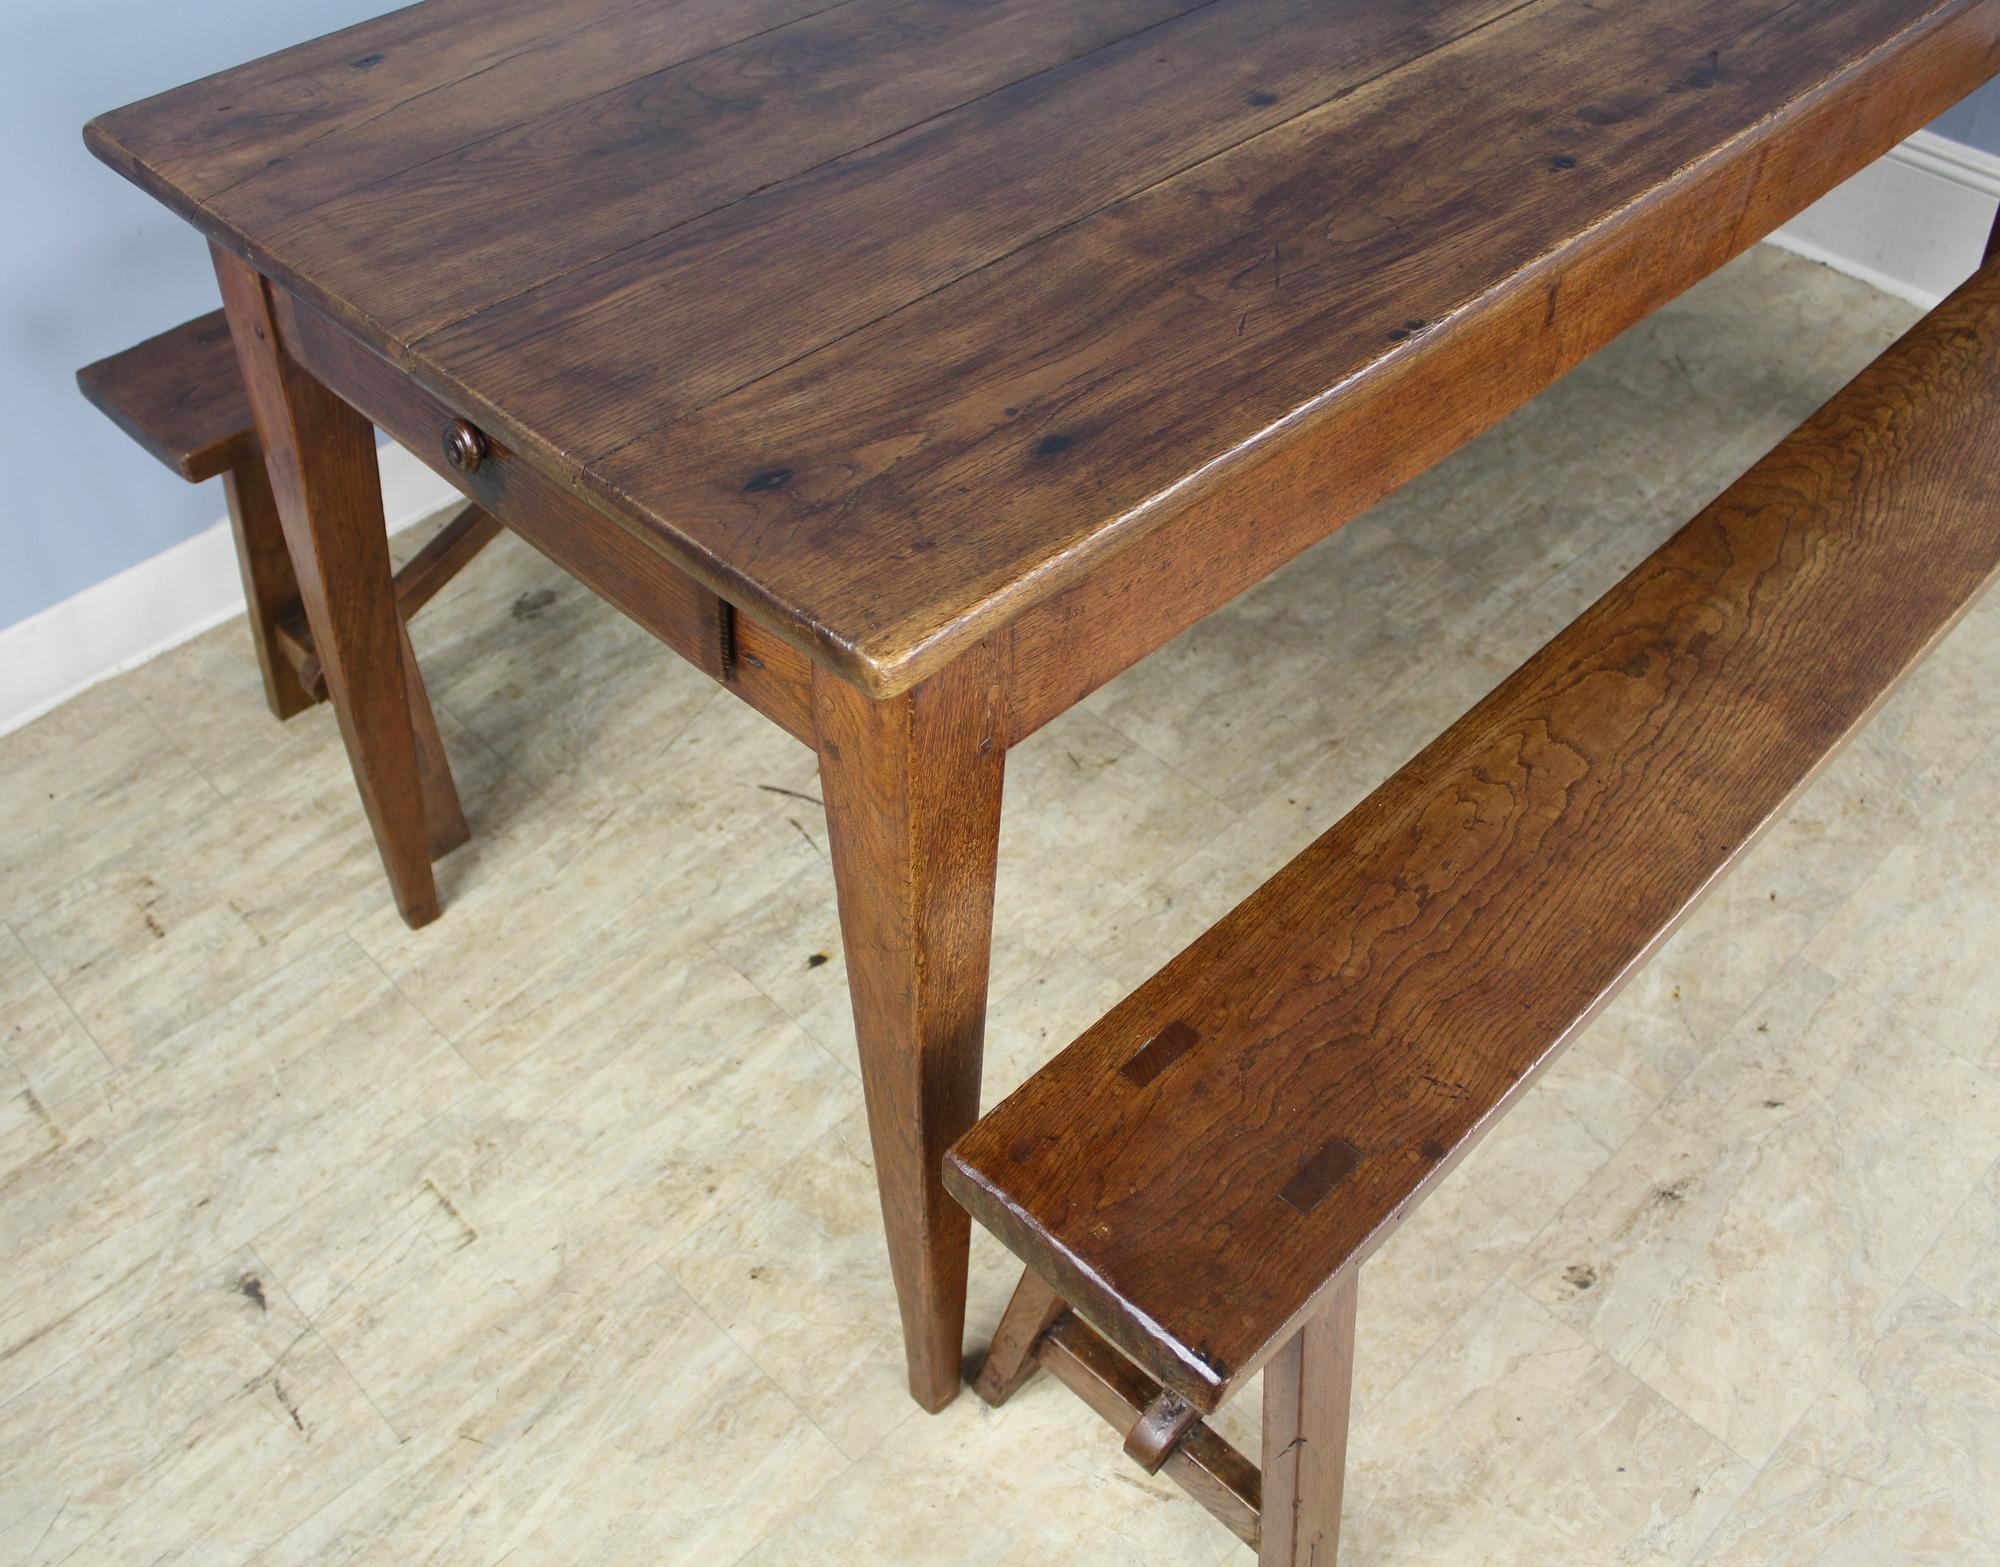 A good country oak farm table with classic tapered legs, pegged nicely at the apron. The top has a warm glowing patina with attractive grain. The two benches are the same length as the table, with similar color and oak grain. We rarely see